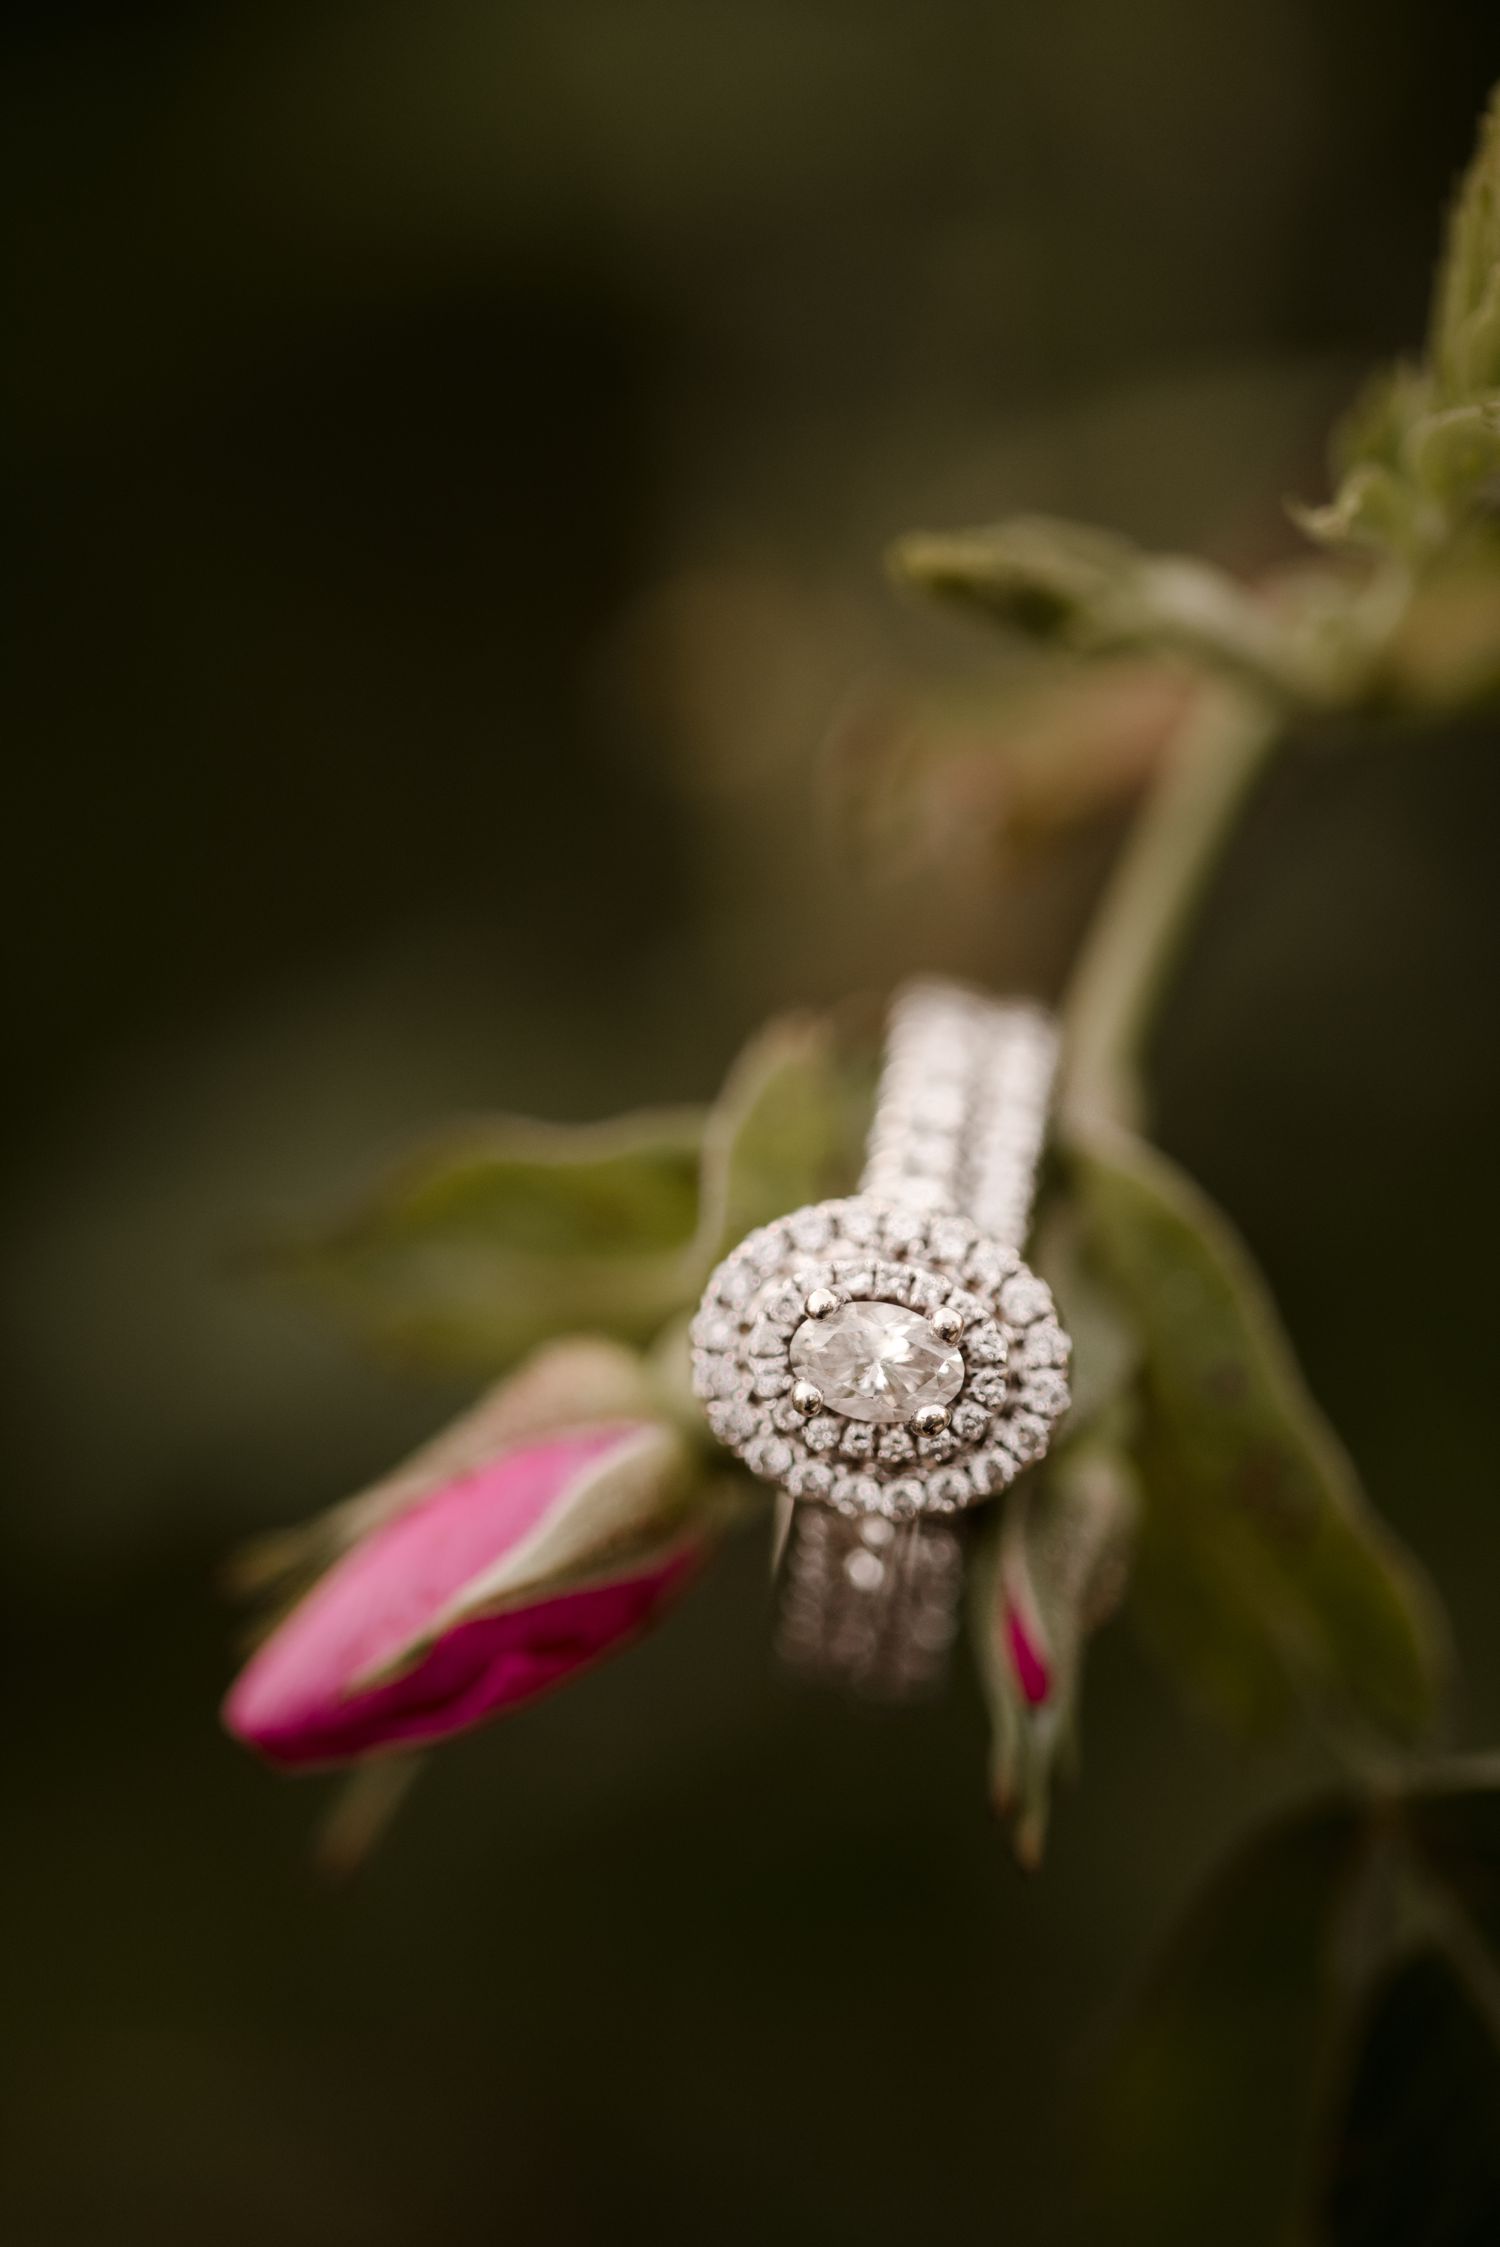 Oval halo engagement ring and wedding band detail shot. Images taken by Vanessa Renae Photography, a winnipeg engagement photographer